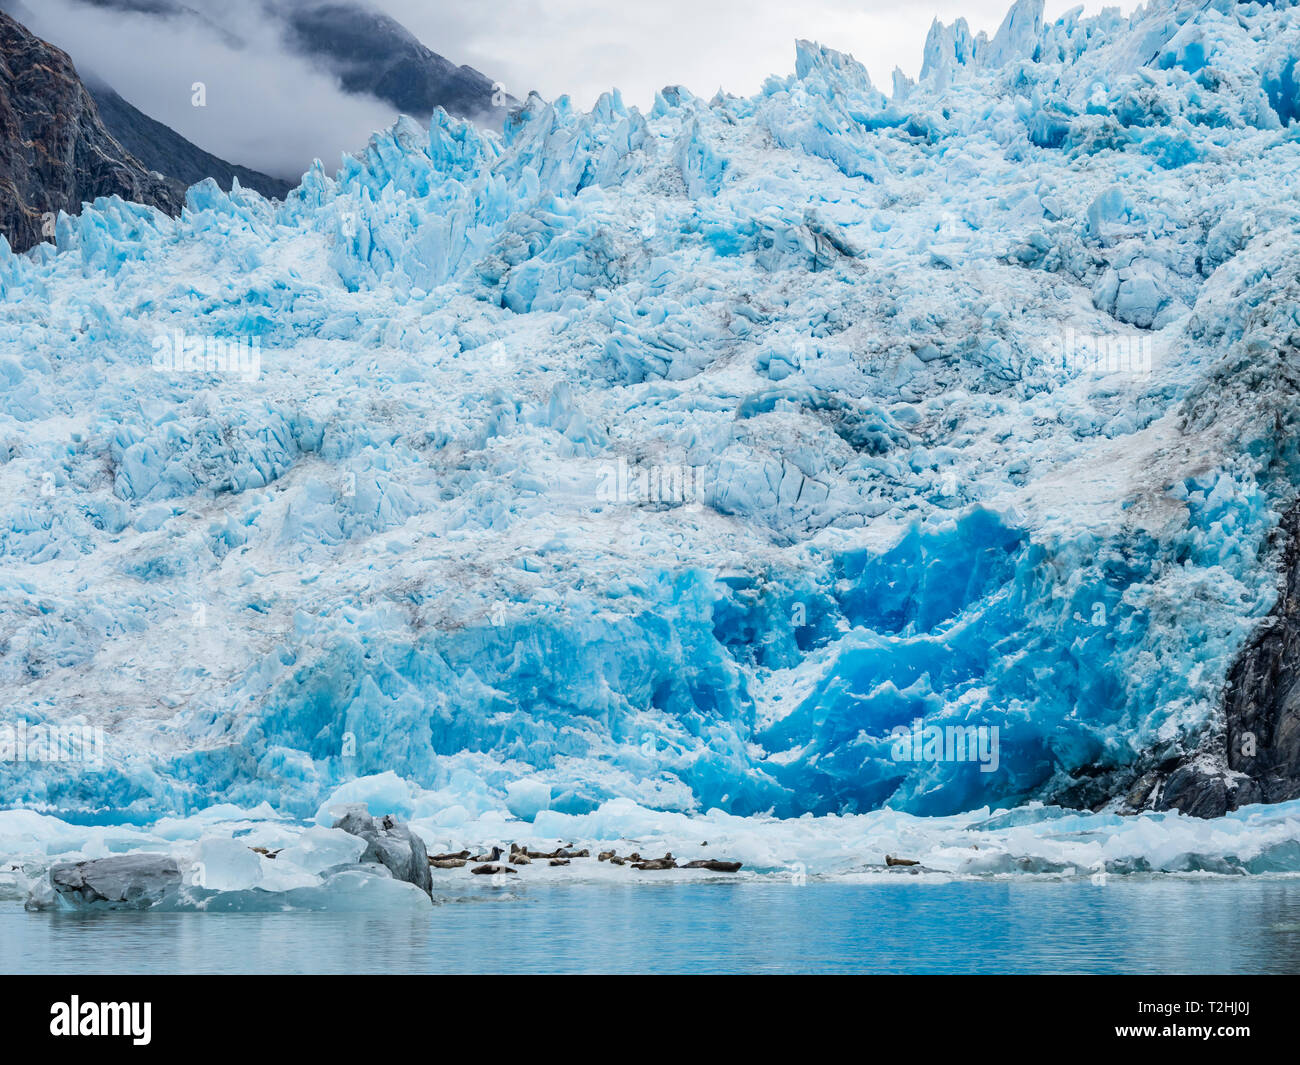 Adult harbour seals, Phoca vitulina, hauled out on ice at South Sawyer Glacier, Tracy Arm, Alaska, United States of America Stock Photo